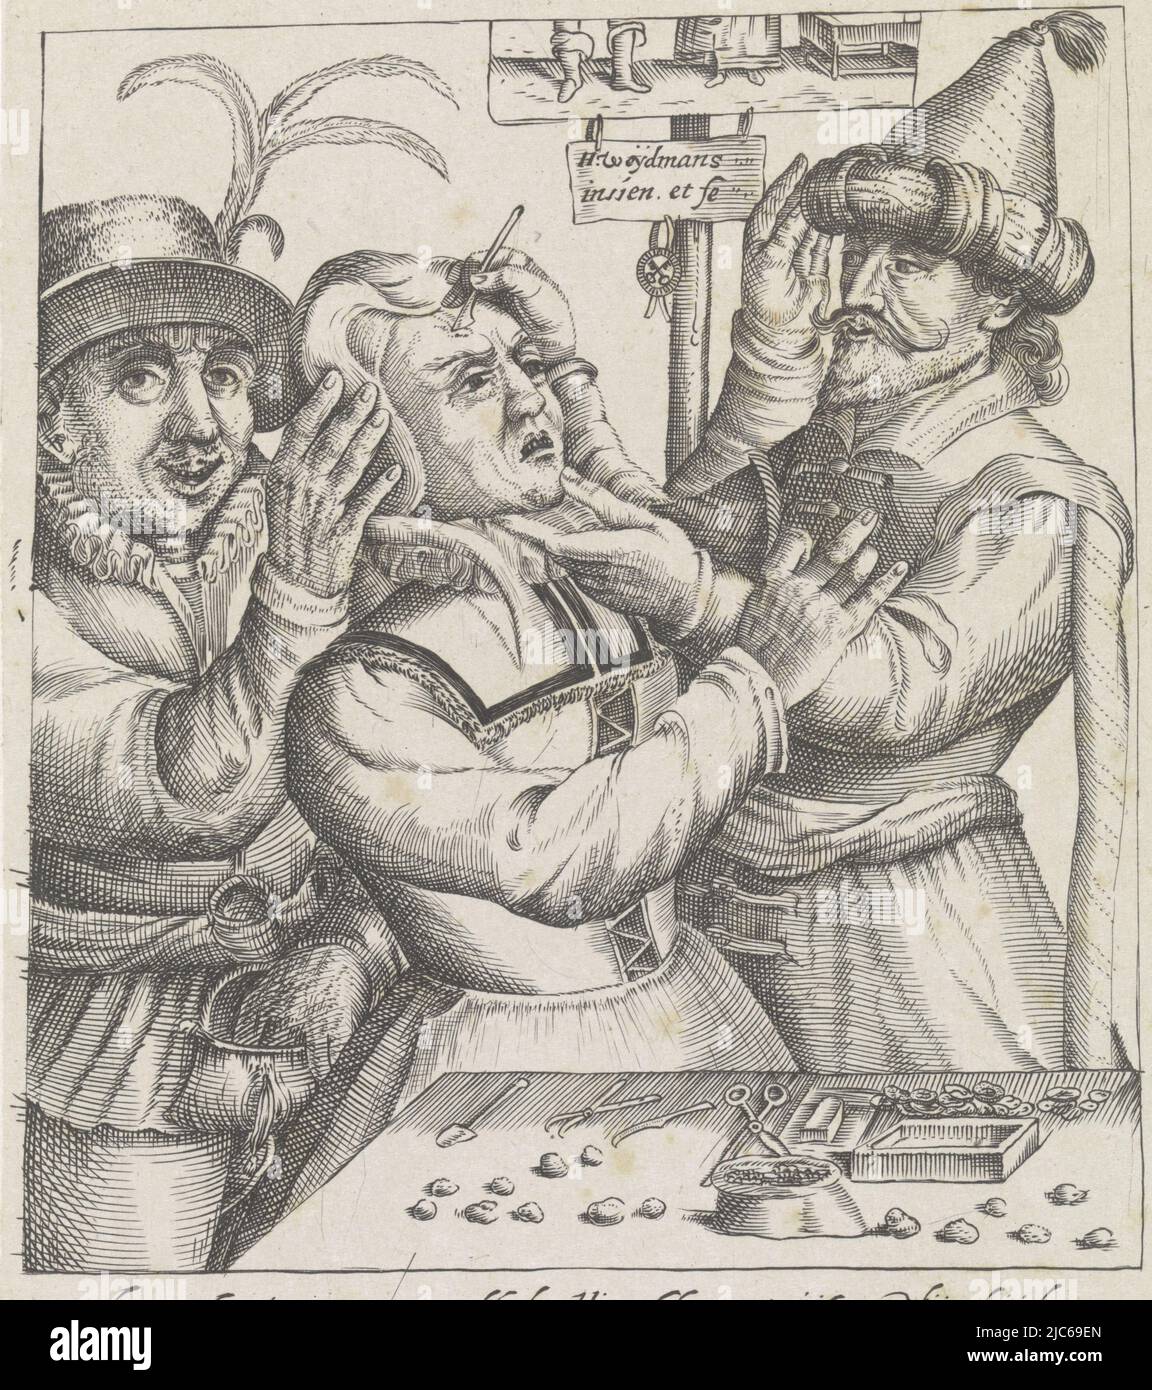 Cutting the boulder. A quack, with turban on head, scratches the forehead of a woman with a scalpel. The man behind the woman is holding her head and groping in his pouch. On the table are instruments and boulders. Hanging from the board in the background is a seal with two keys, perhaps the coat of arms of the city of Leiden. At the bottom a line of text in Dutch, Keisnijder, print maker: William Young Ottley, print maker: Charles Walker, (rejected attribution), Nicolaes Weydtmans, (mentioned on object), London, 1828, paper, etching, h 157 mm × w 130 mm Stock Photo